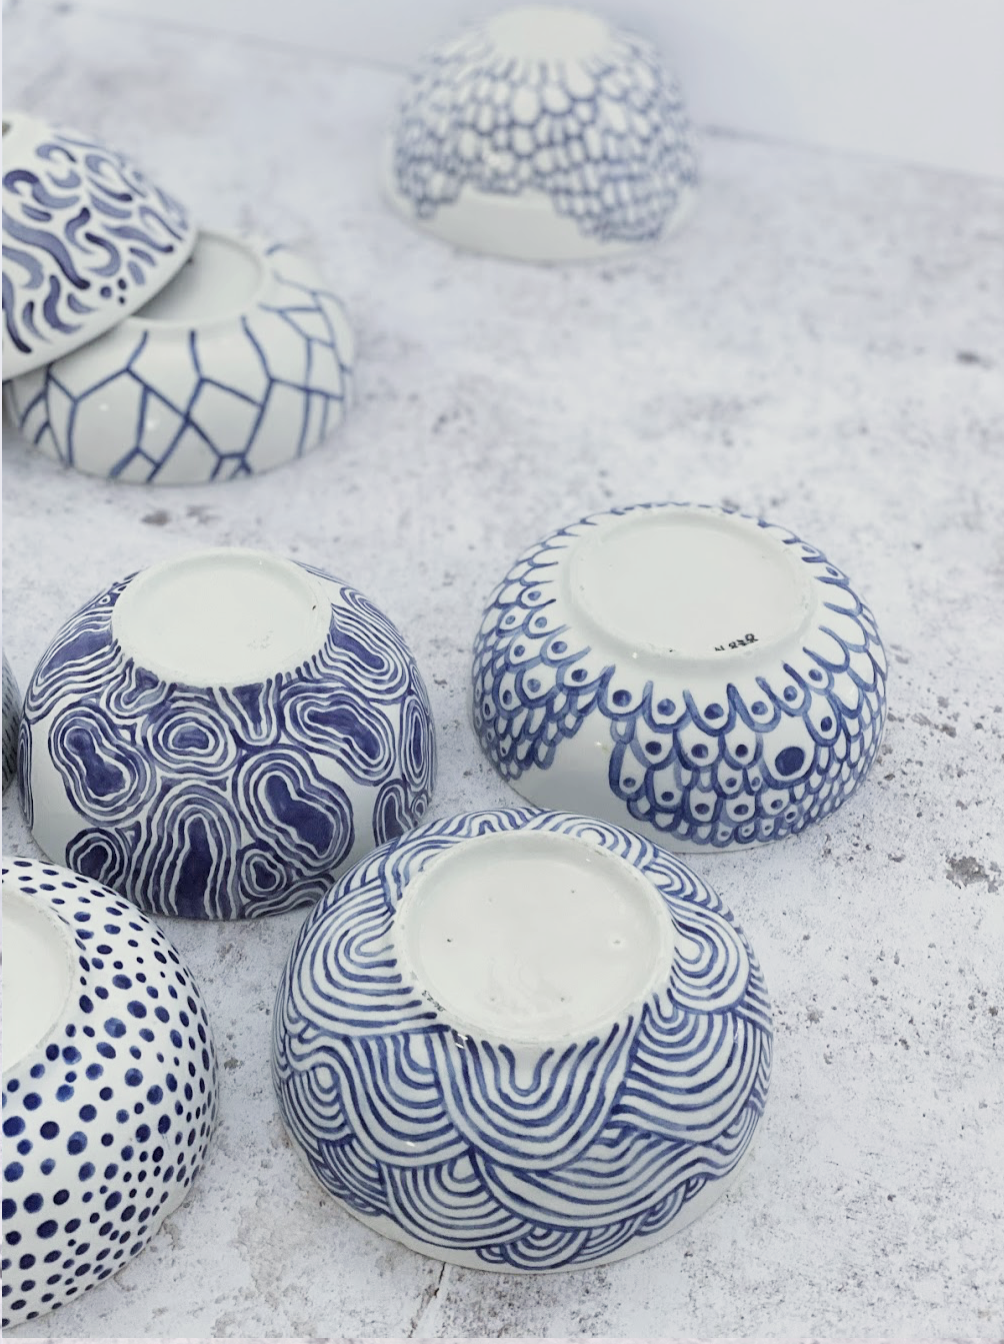 Easy Pottery Painting Ideas - The Most Amazing Ideas